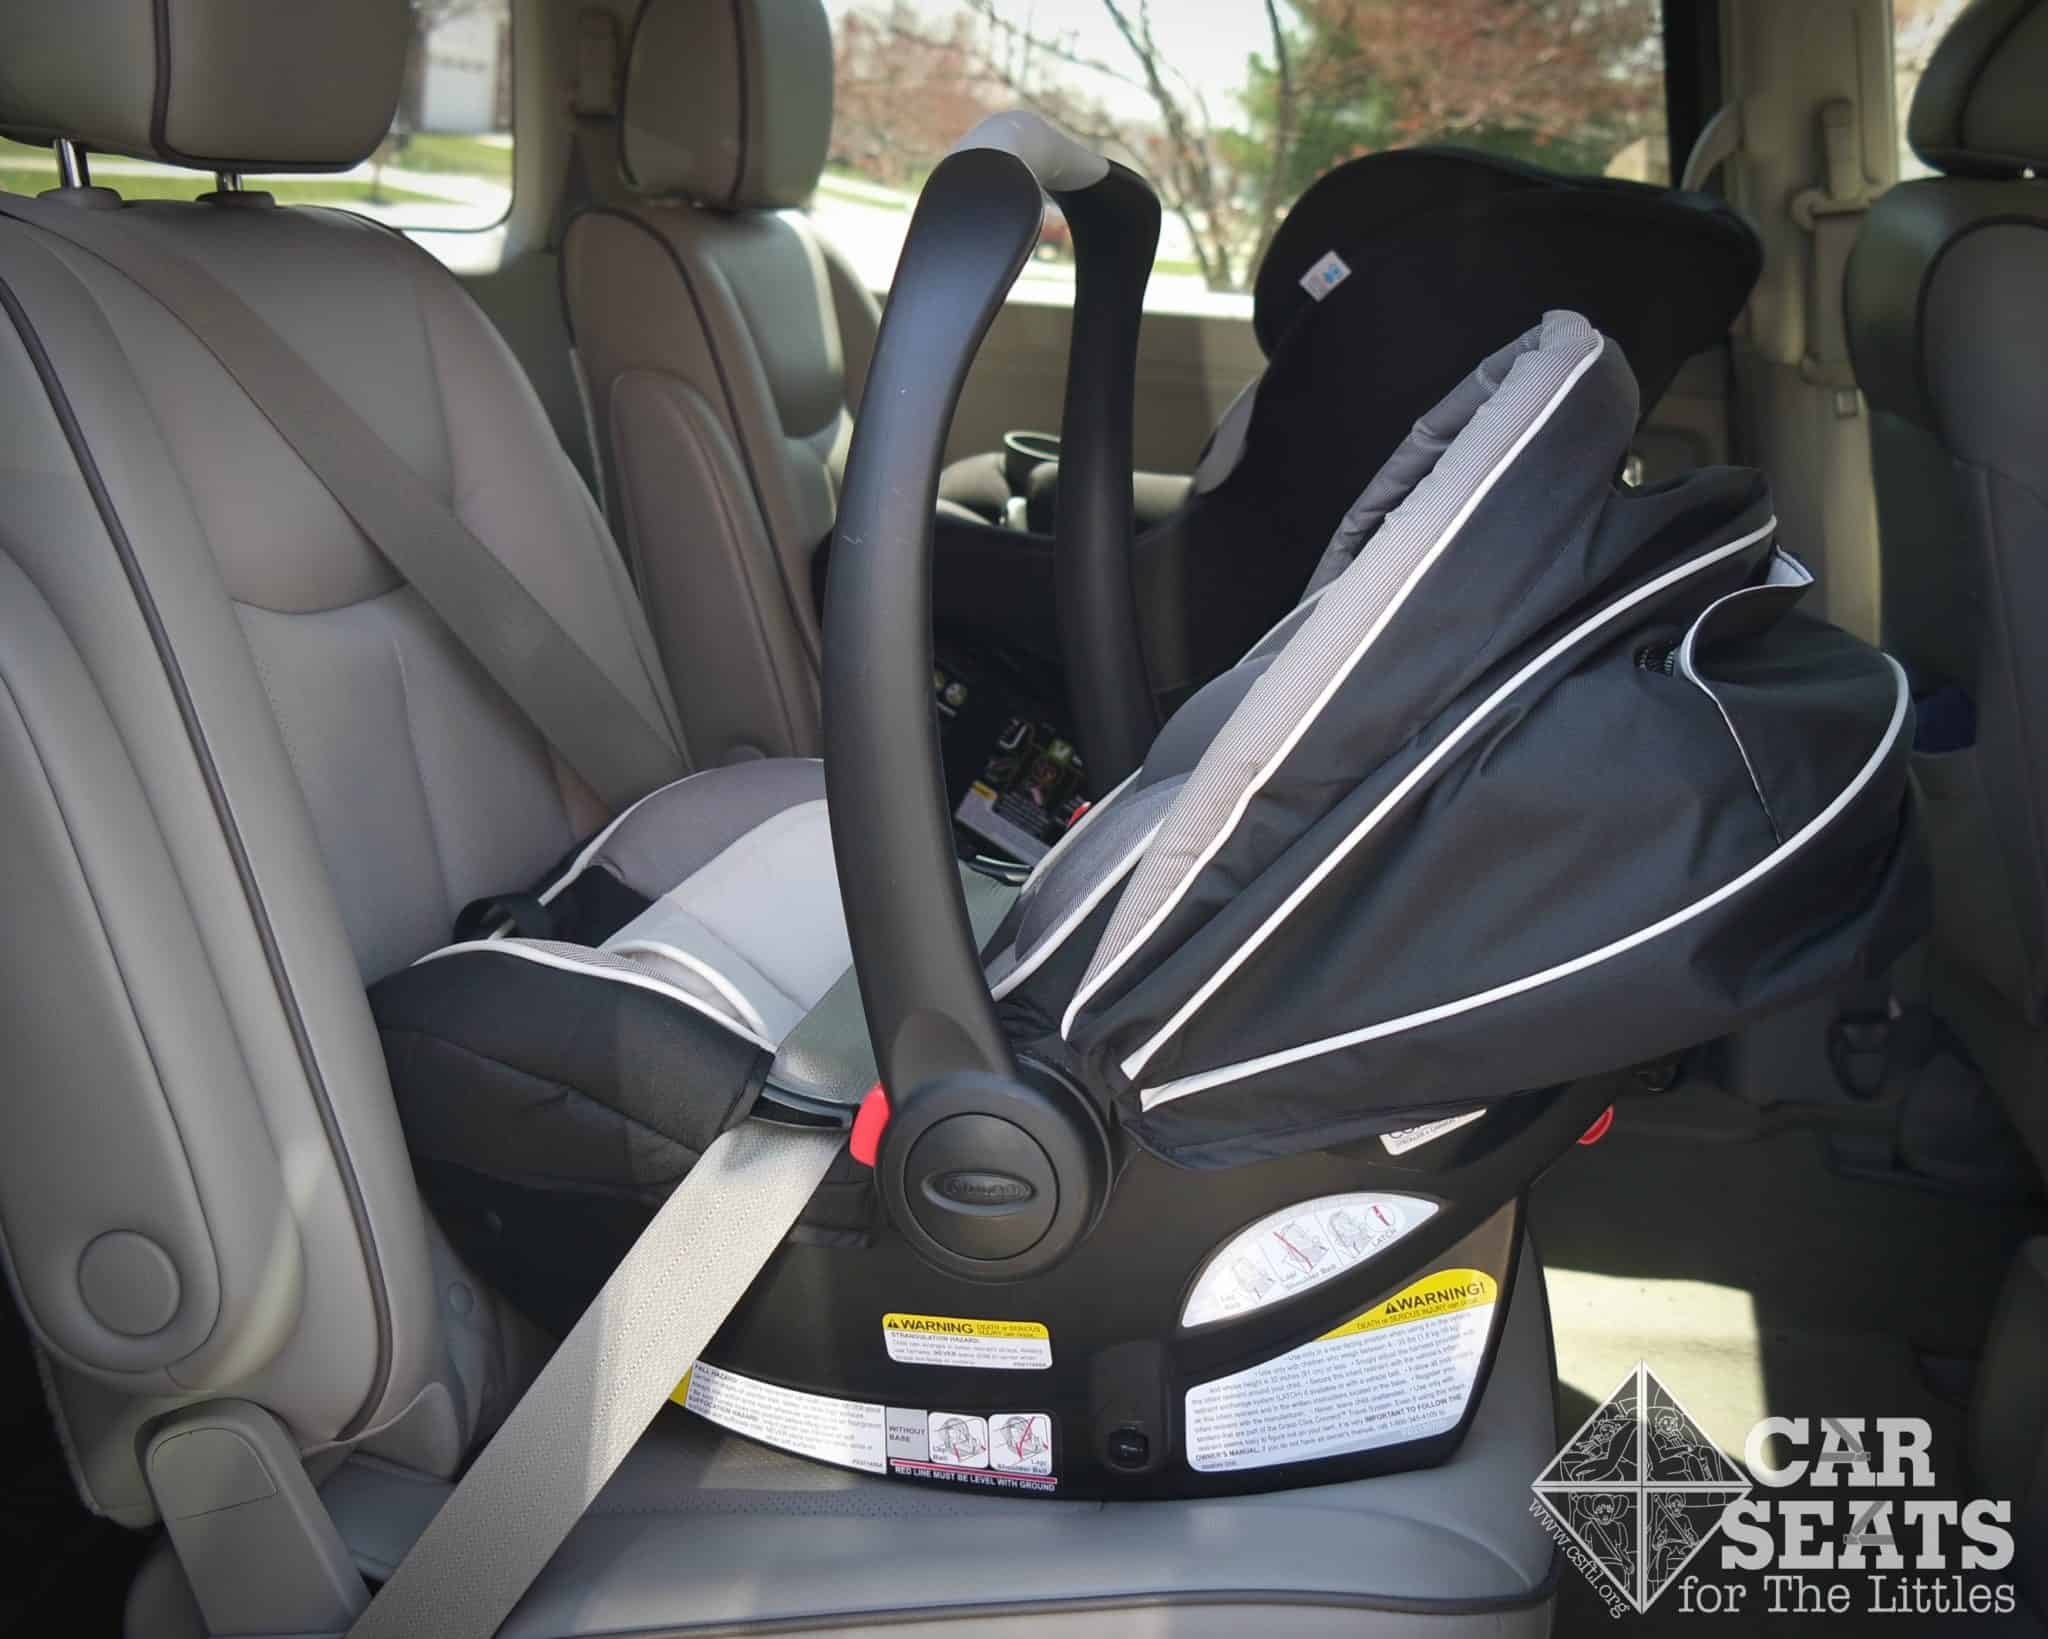 Graco Snugride Connect 35 Lx Review Car Seats For The Littles - How To Install Graco Car Seat Forward Facing With Belt